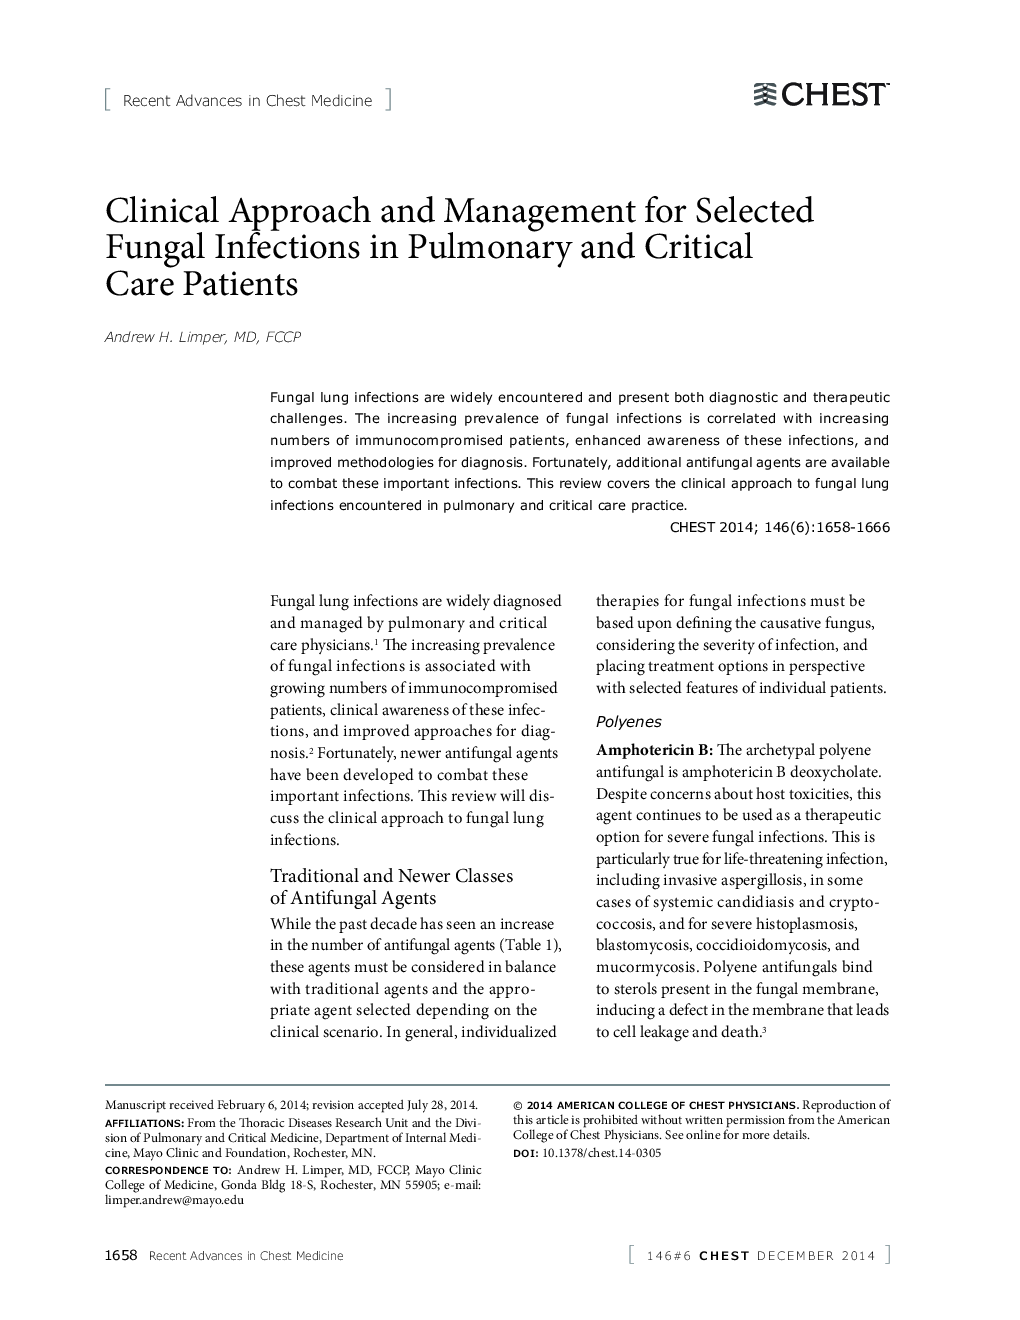 Recent Advances in Chest MedicineClinical Approach and Management for Selected Fungal Infections in Pulmonary and Critical Care Patients